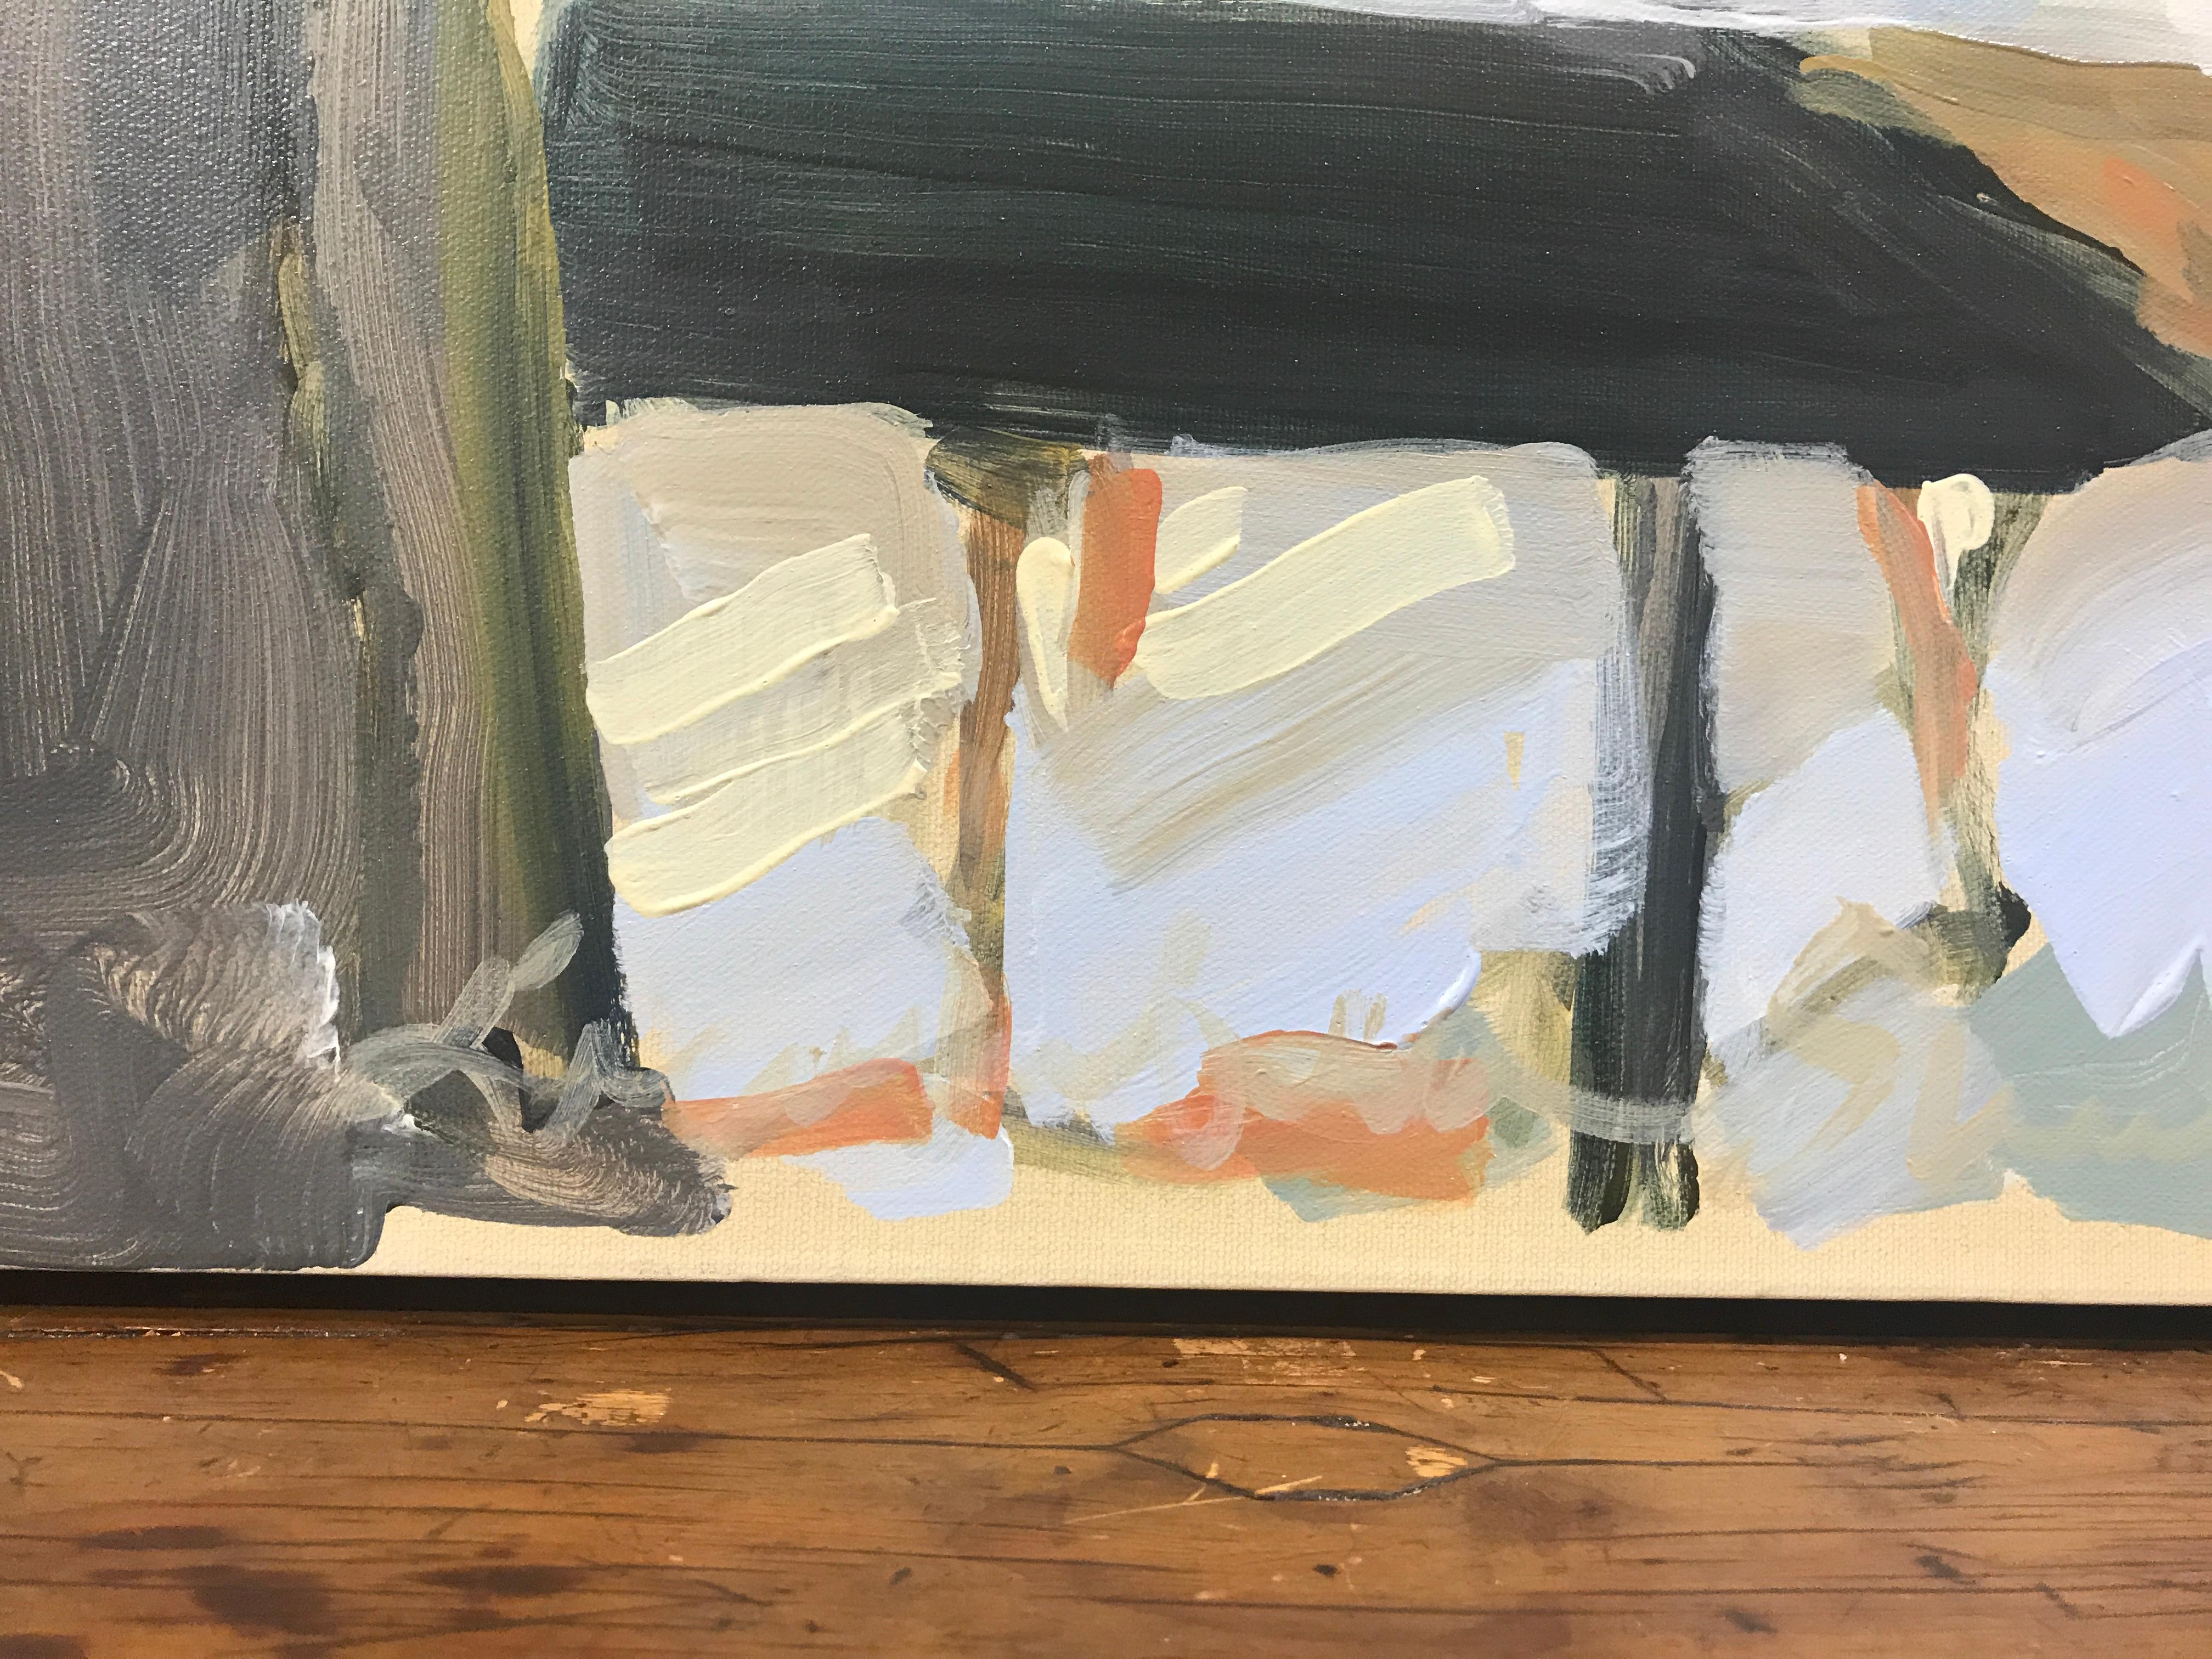 'Sunlit Dining Room' is an Impressionist oil and acrylic on canvas painting of vertical format created by American artist Laura Shubert in 2019. Featuring a palette made of cream, grey, green, white and light blue tones, the painting depicts an